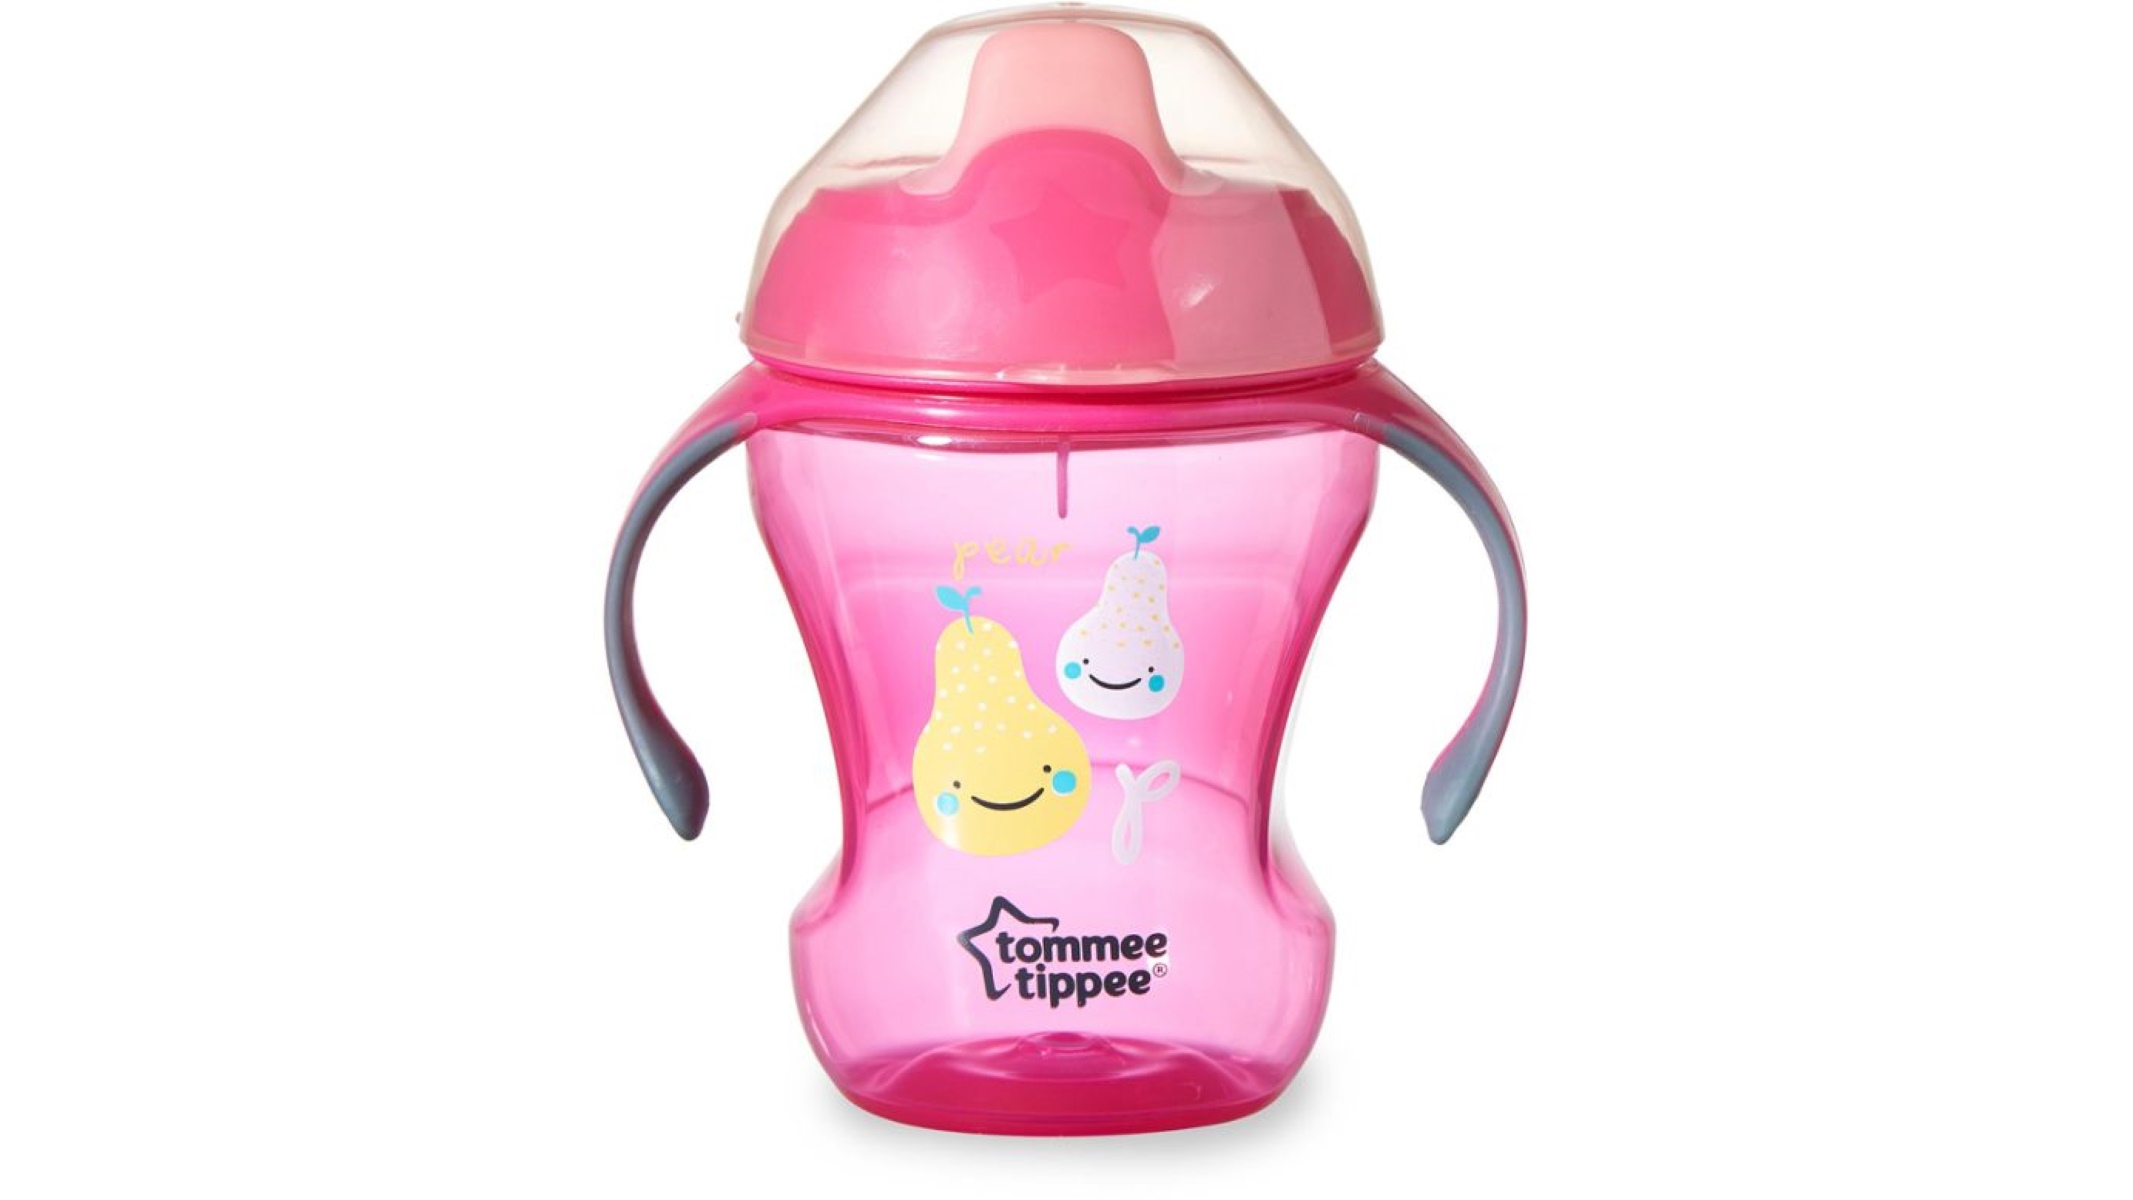 How To Use Tommee Tippee Sippy Cup